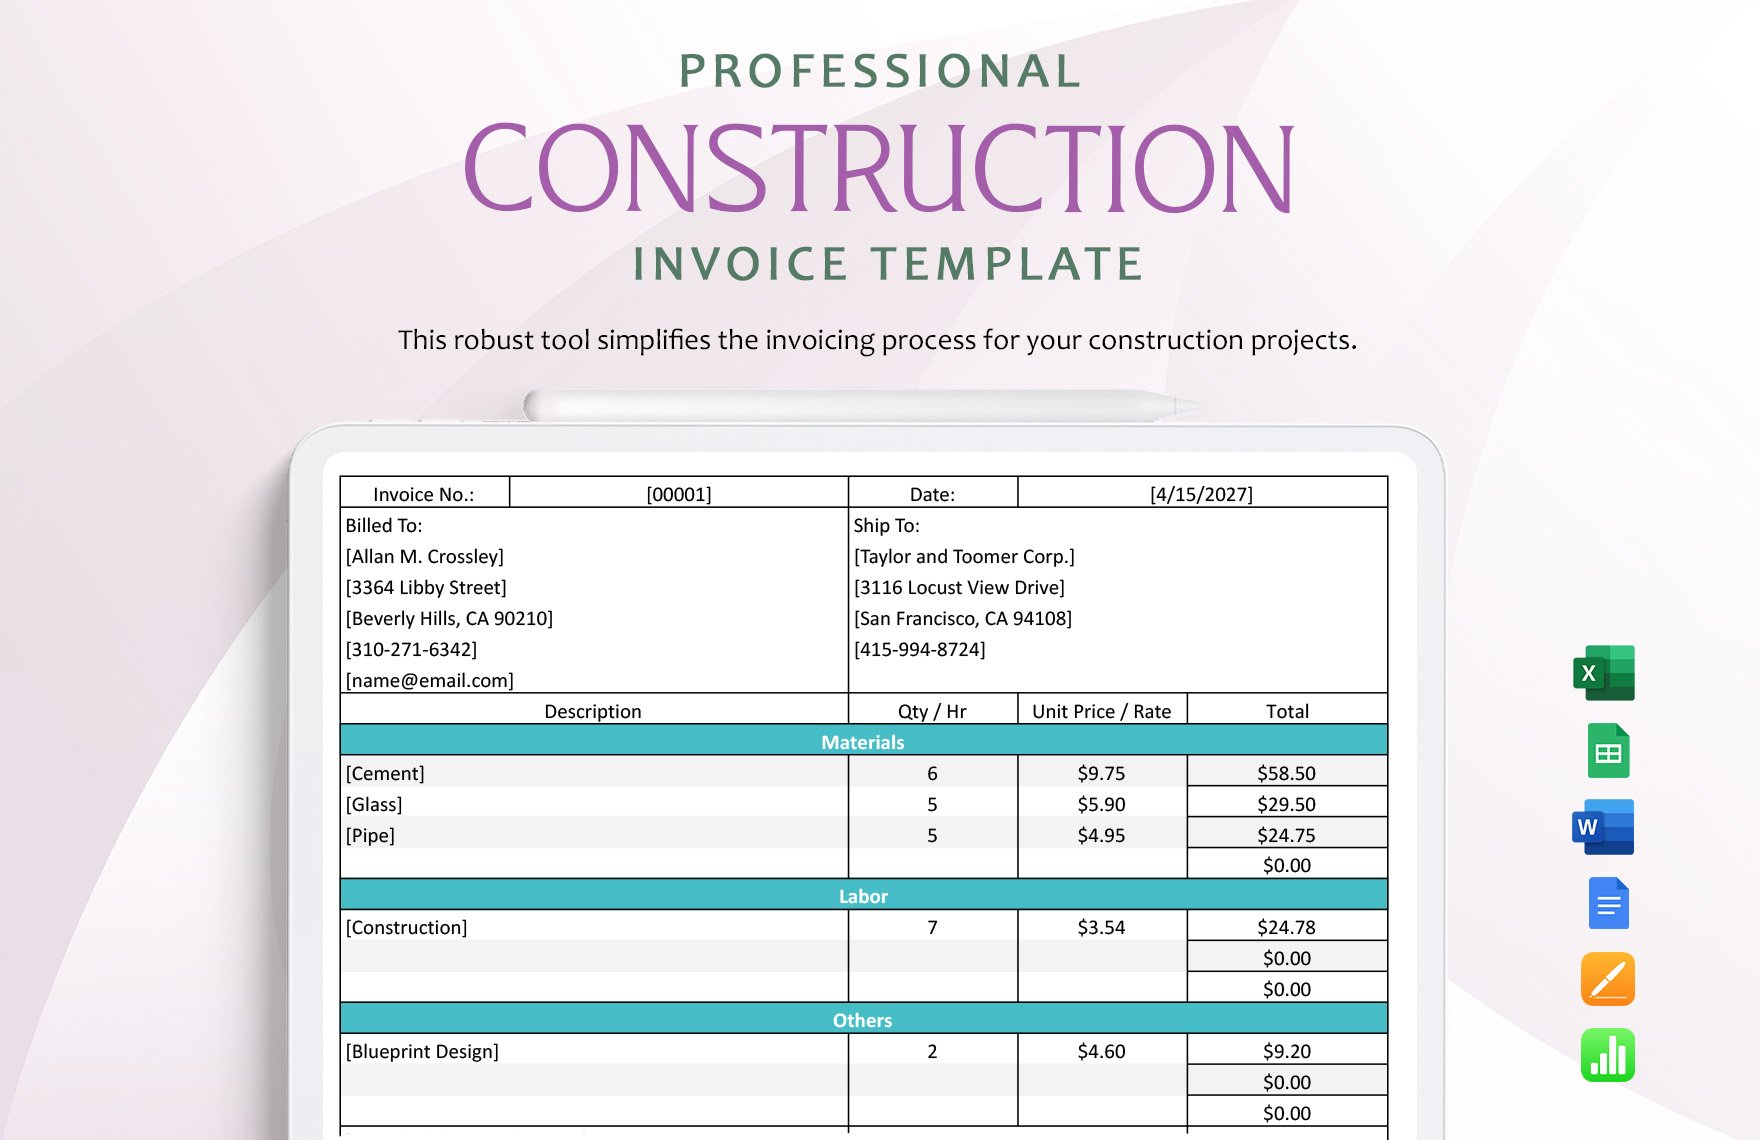 Professional Construction Invoice Template in Word, Google Docs, Excel, Google Sheets, Apple Pages, Apple Numbers